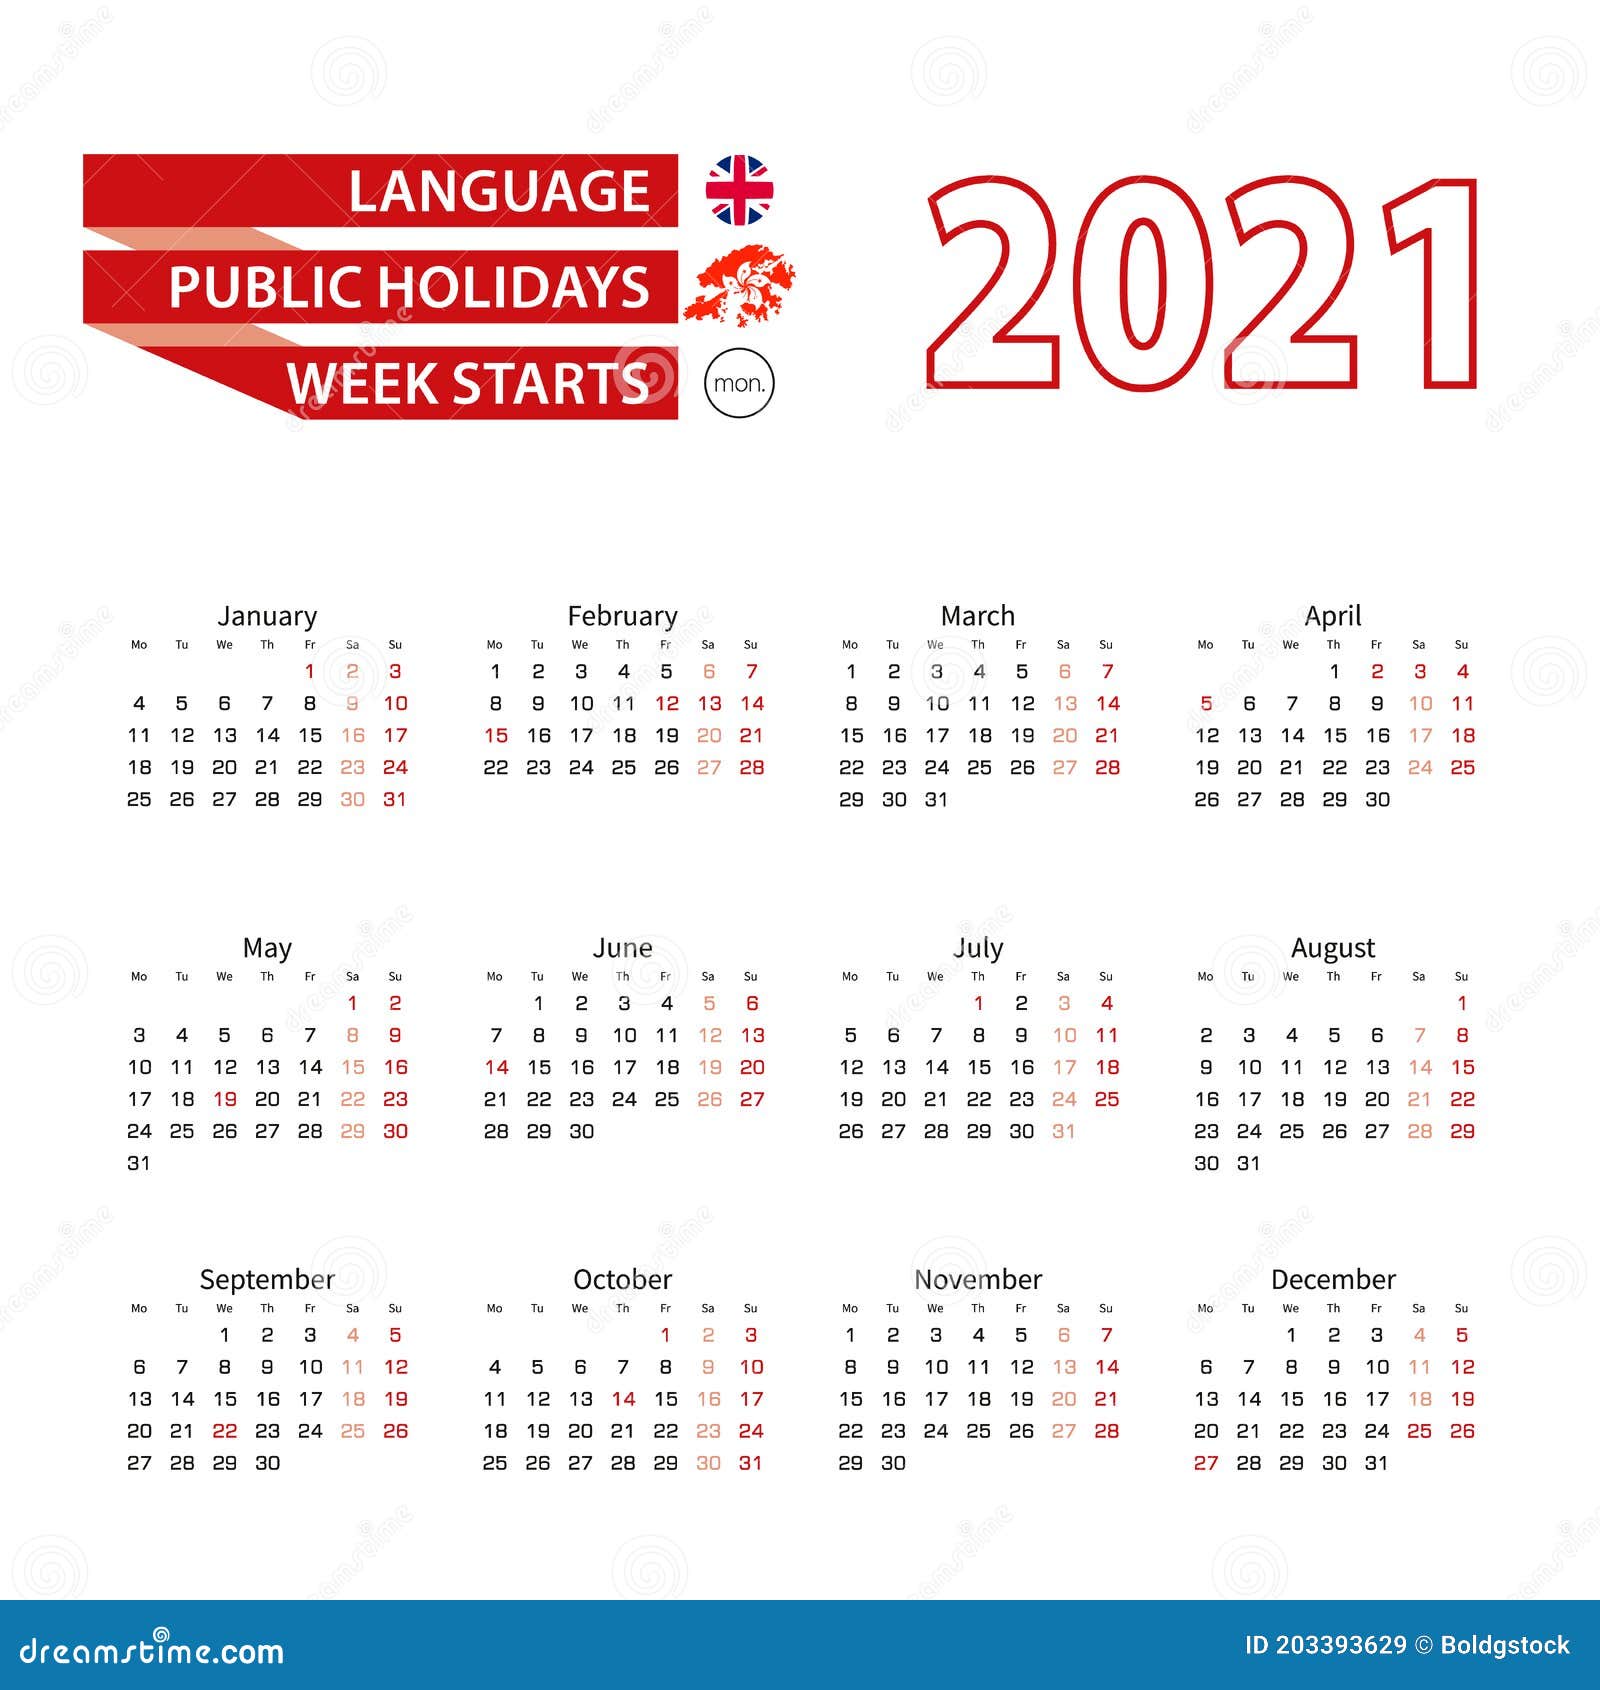 Calendar 2021 In English Language With Public Holidays The Country Of Hong Kong In Year 2021 Stock Vector Illustration Of Fold Element 203393629